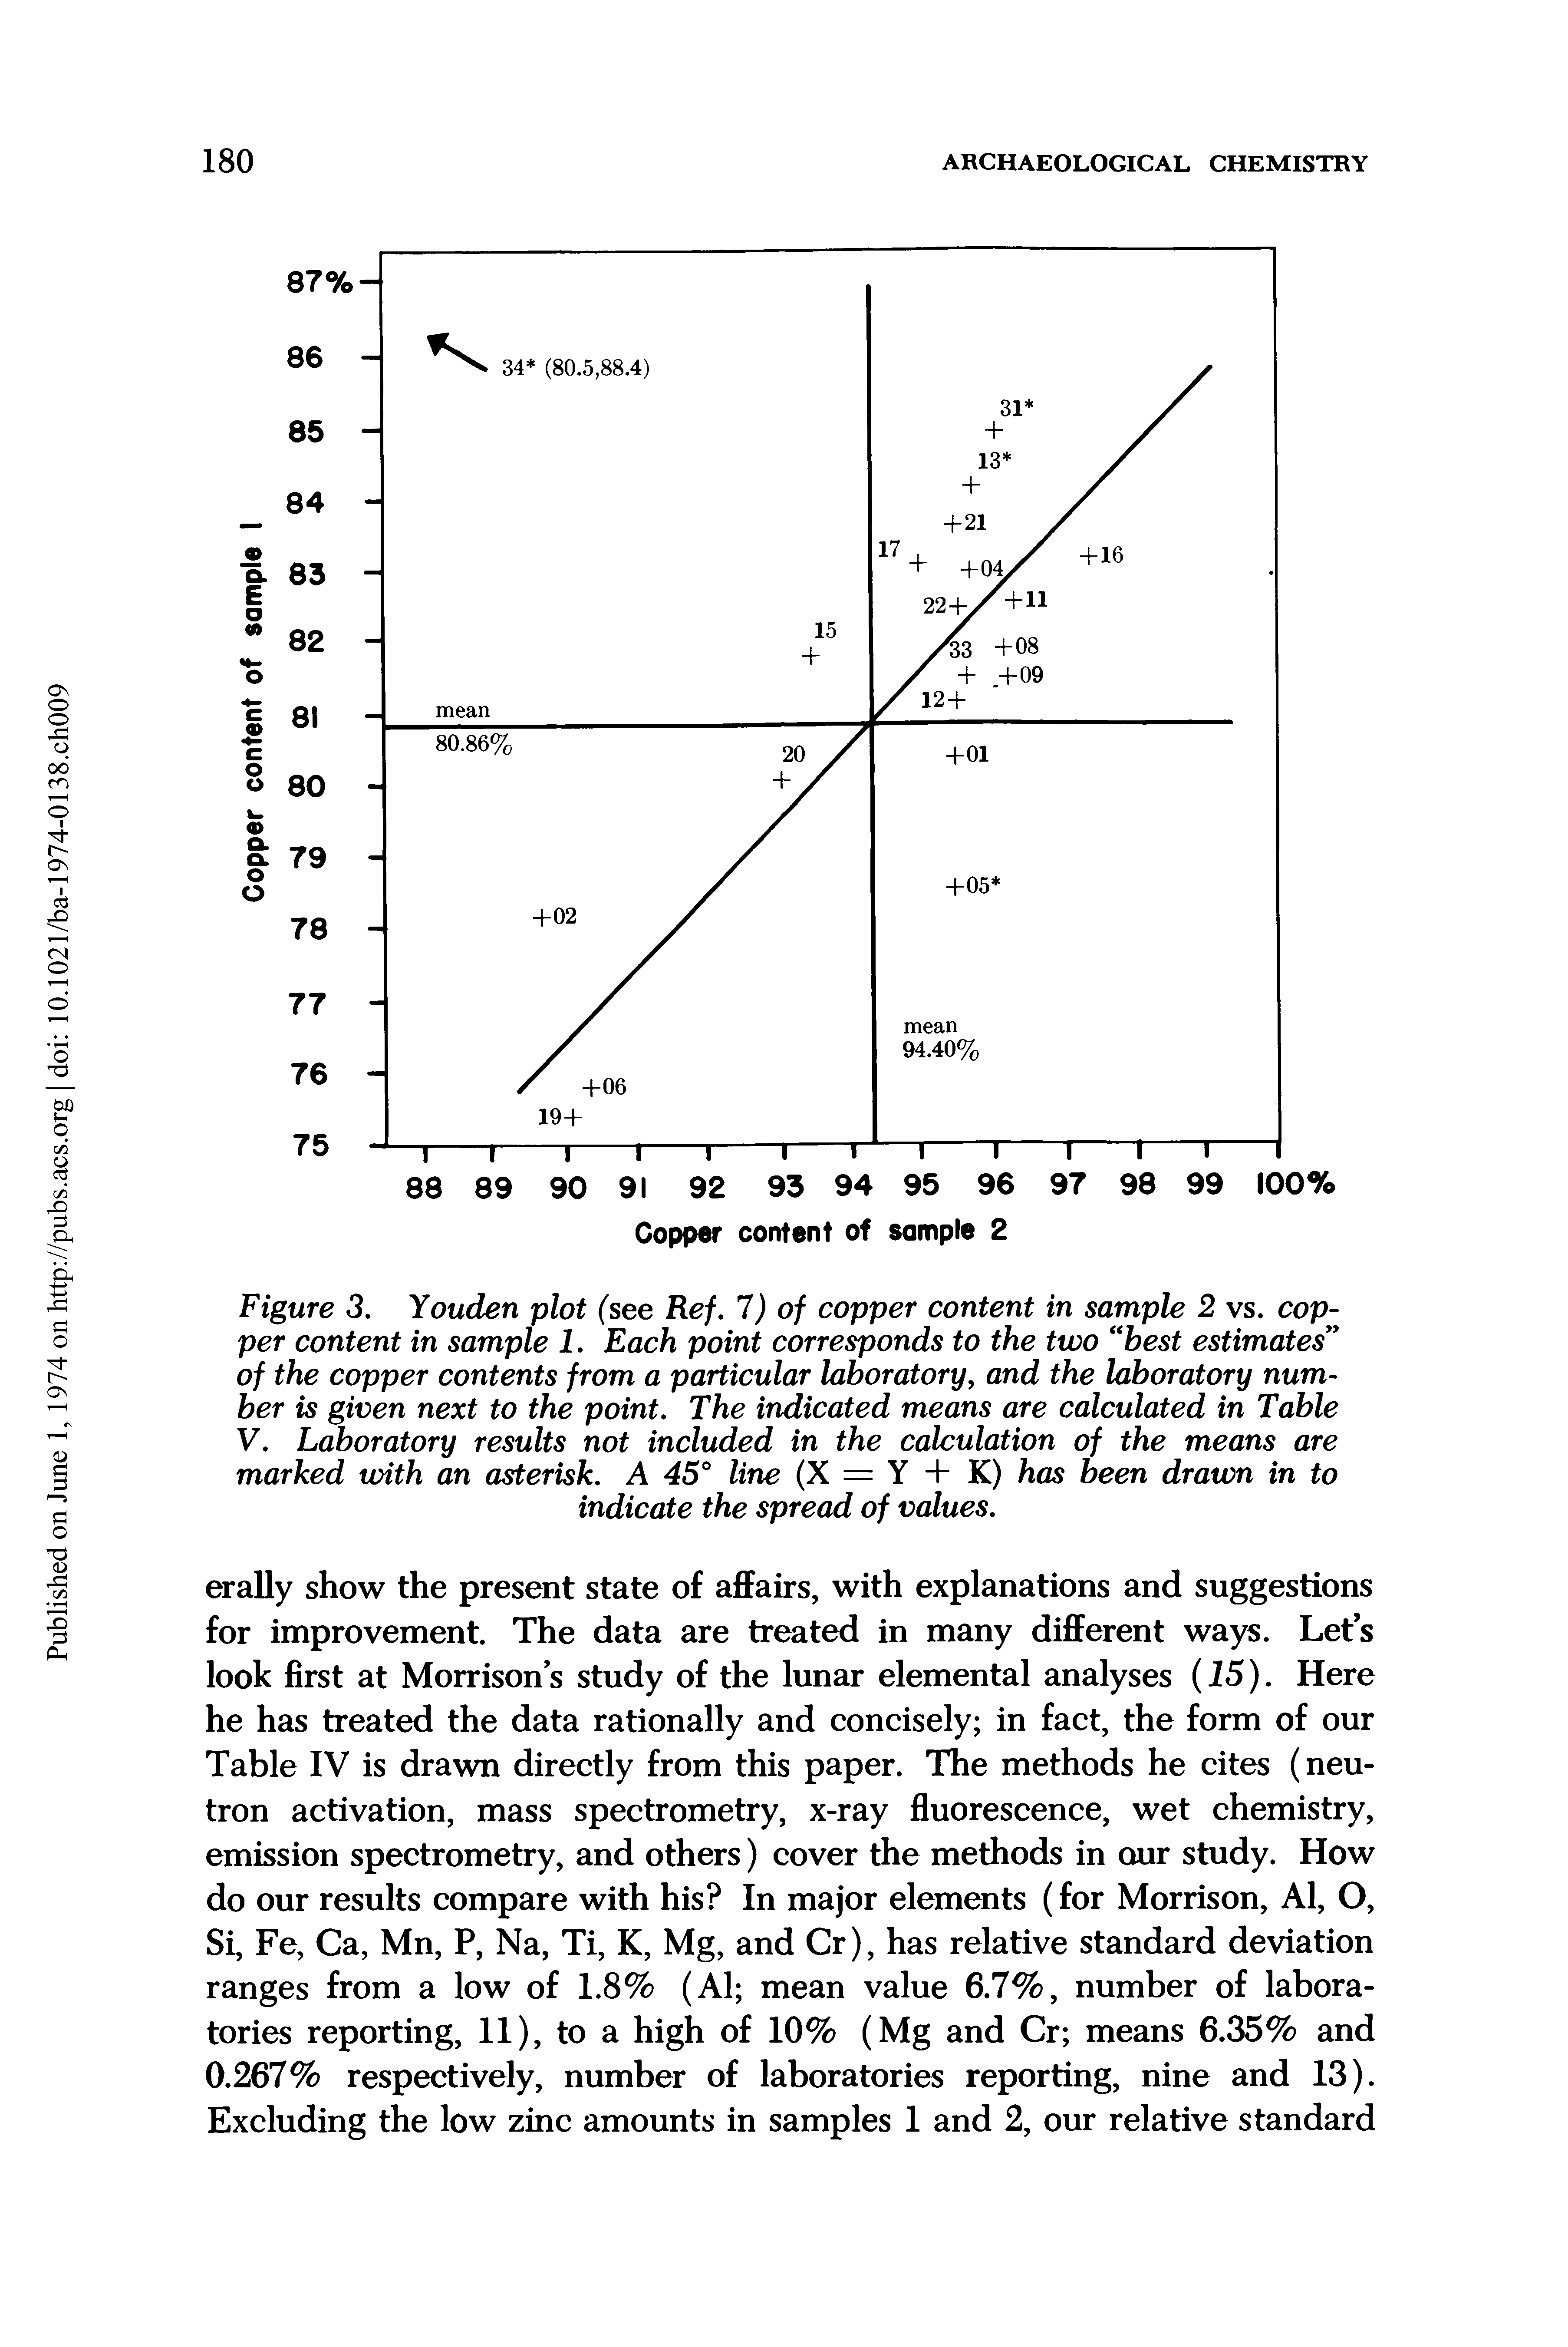 Figure 3. Youden plot (see Ref. 7) of copper content in sample 2 vs. copper content in sample 1. Each point corresponds to the two best estimates" of the copper contents from a particular laboratory, and the laboratory number is given next to the point. The indicated means are calculated in Table V. Laboratory results not included in the calculation of the means are marked with an asterisk. A 45° line (X = Y + K) has been drawn in to indicate the spread of values.